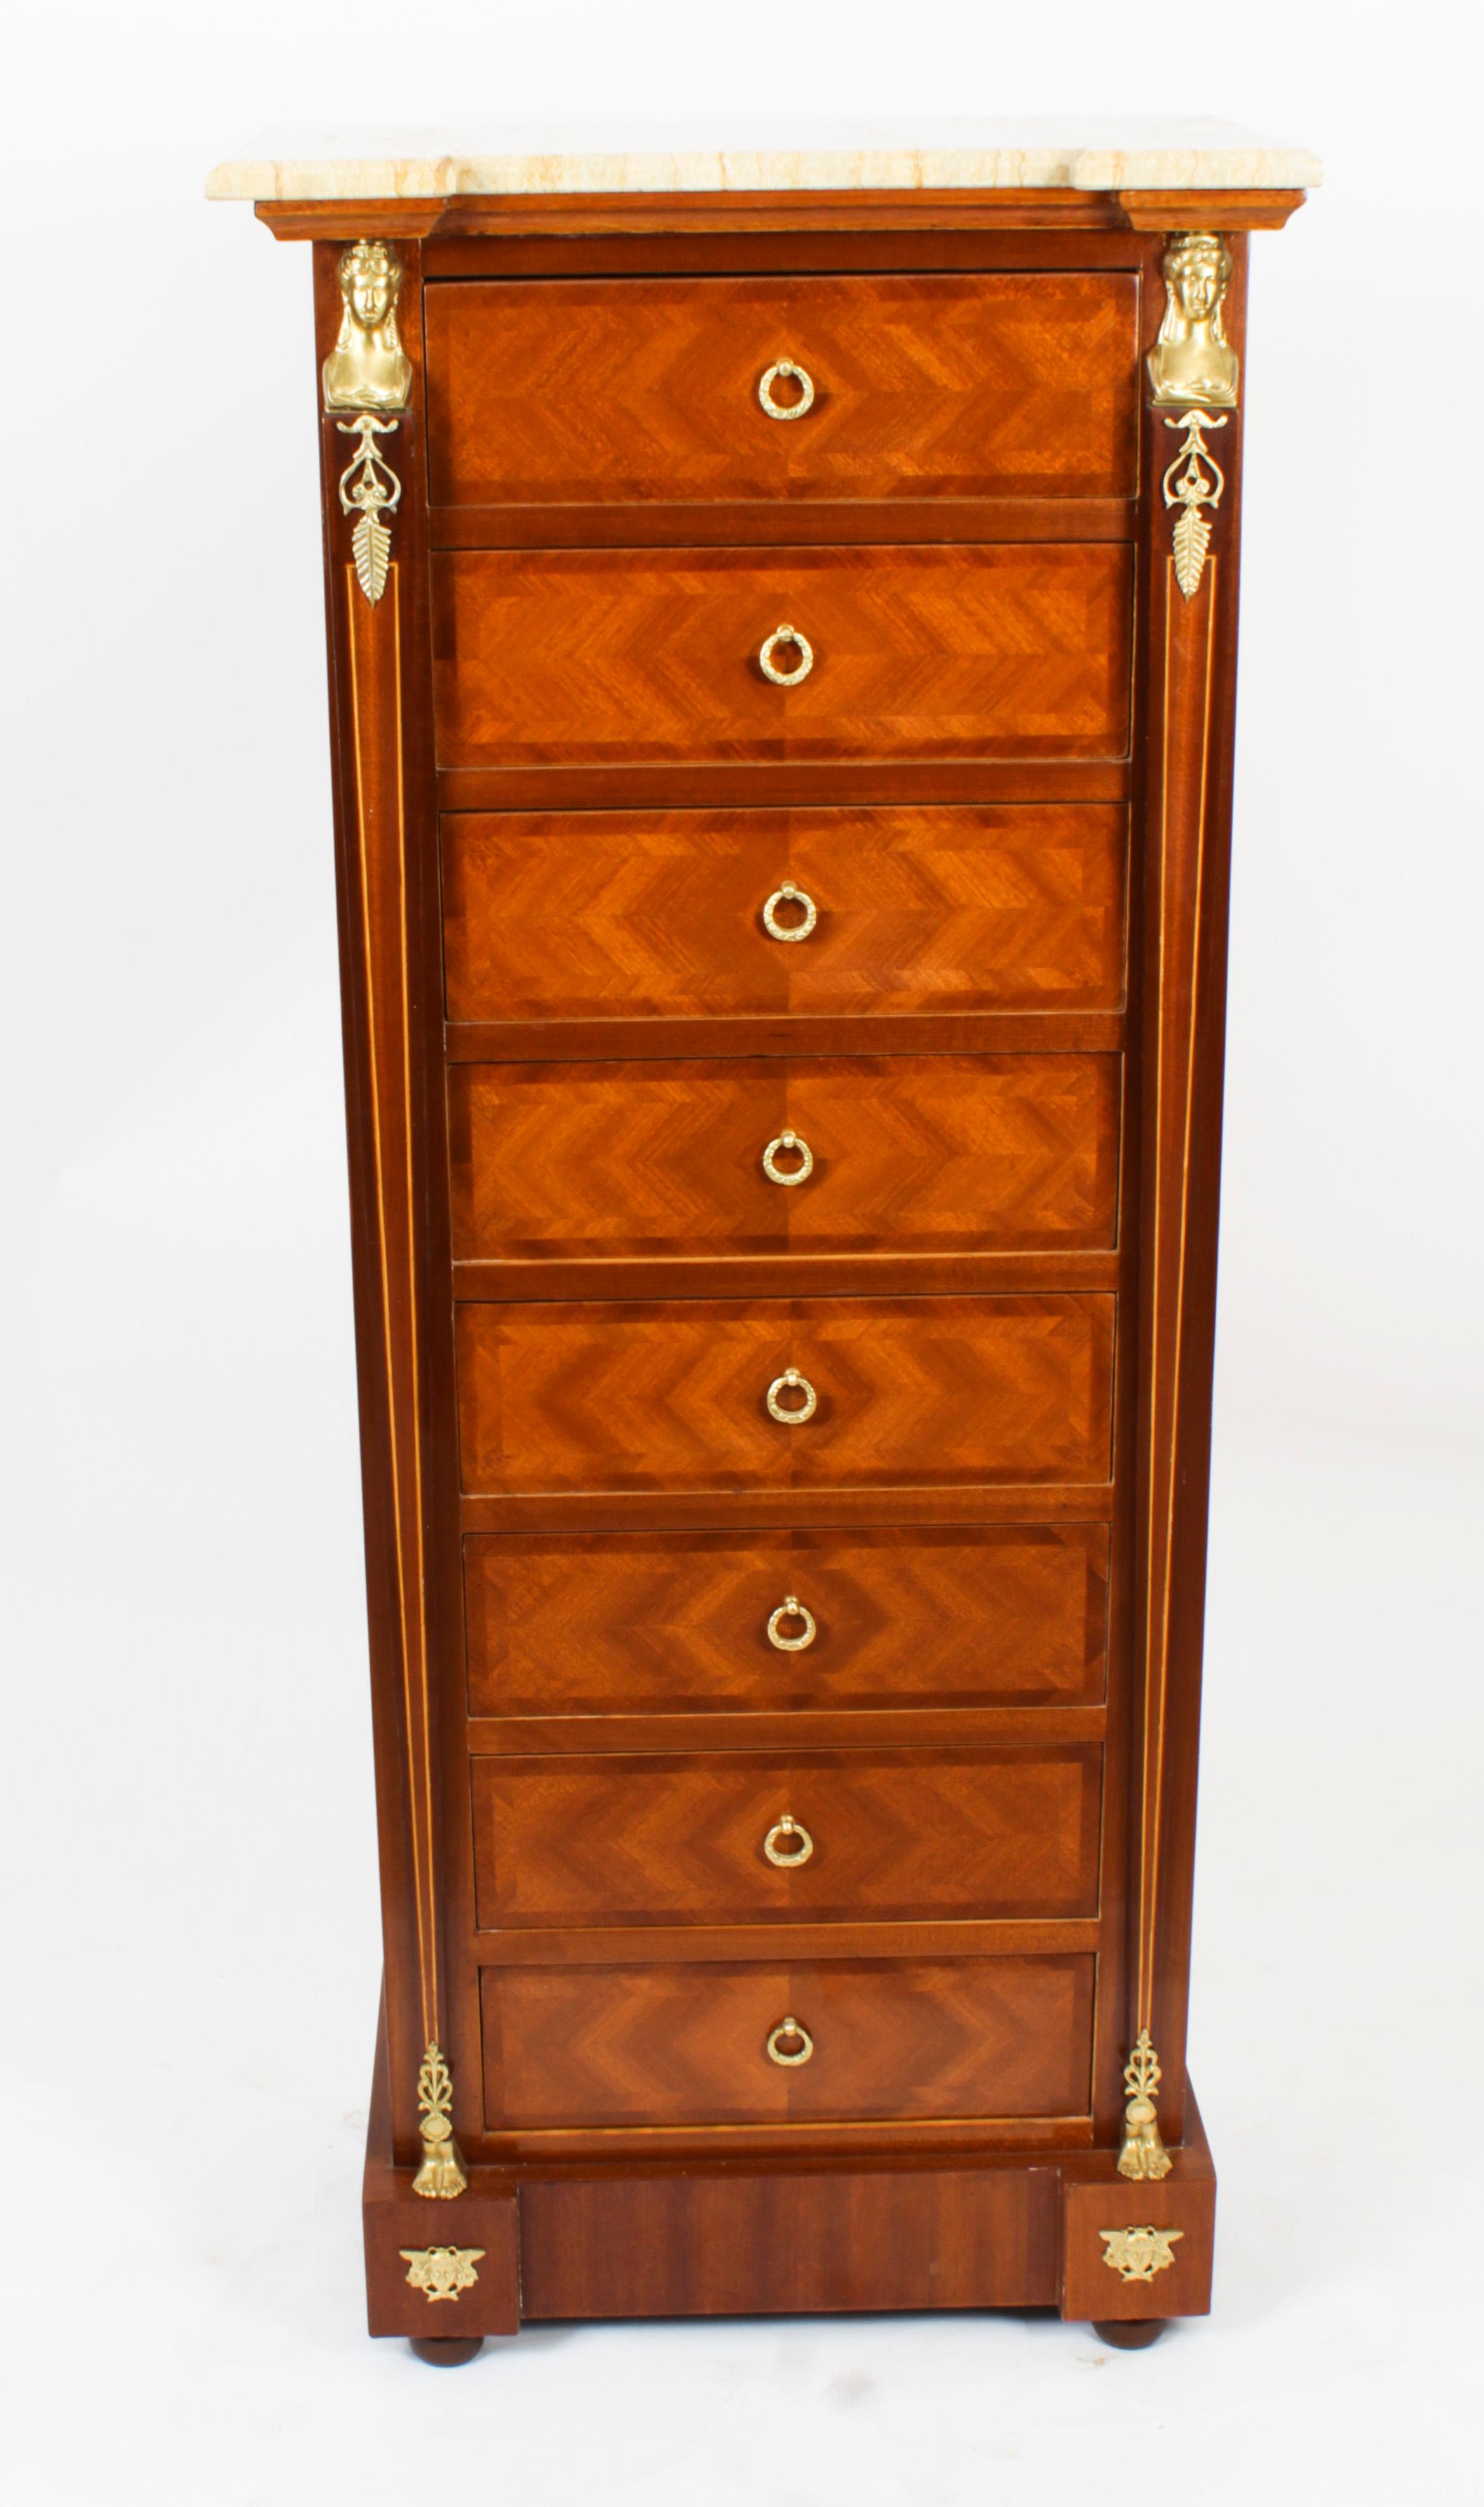 This is a beautiful vintage Empire Revival maple and walnut marble topped chest, late 20th Century in date.

This stunning chest features a beautiful cream marble top and attractive ormolu mounts with eight drawers.

Add a touch of unparalleled